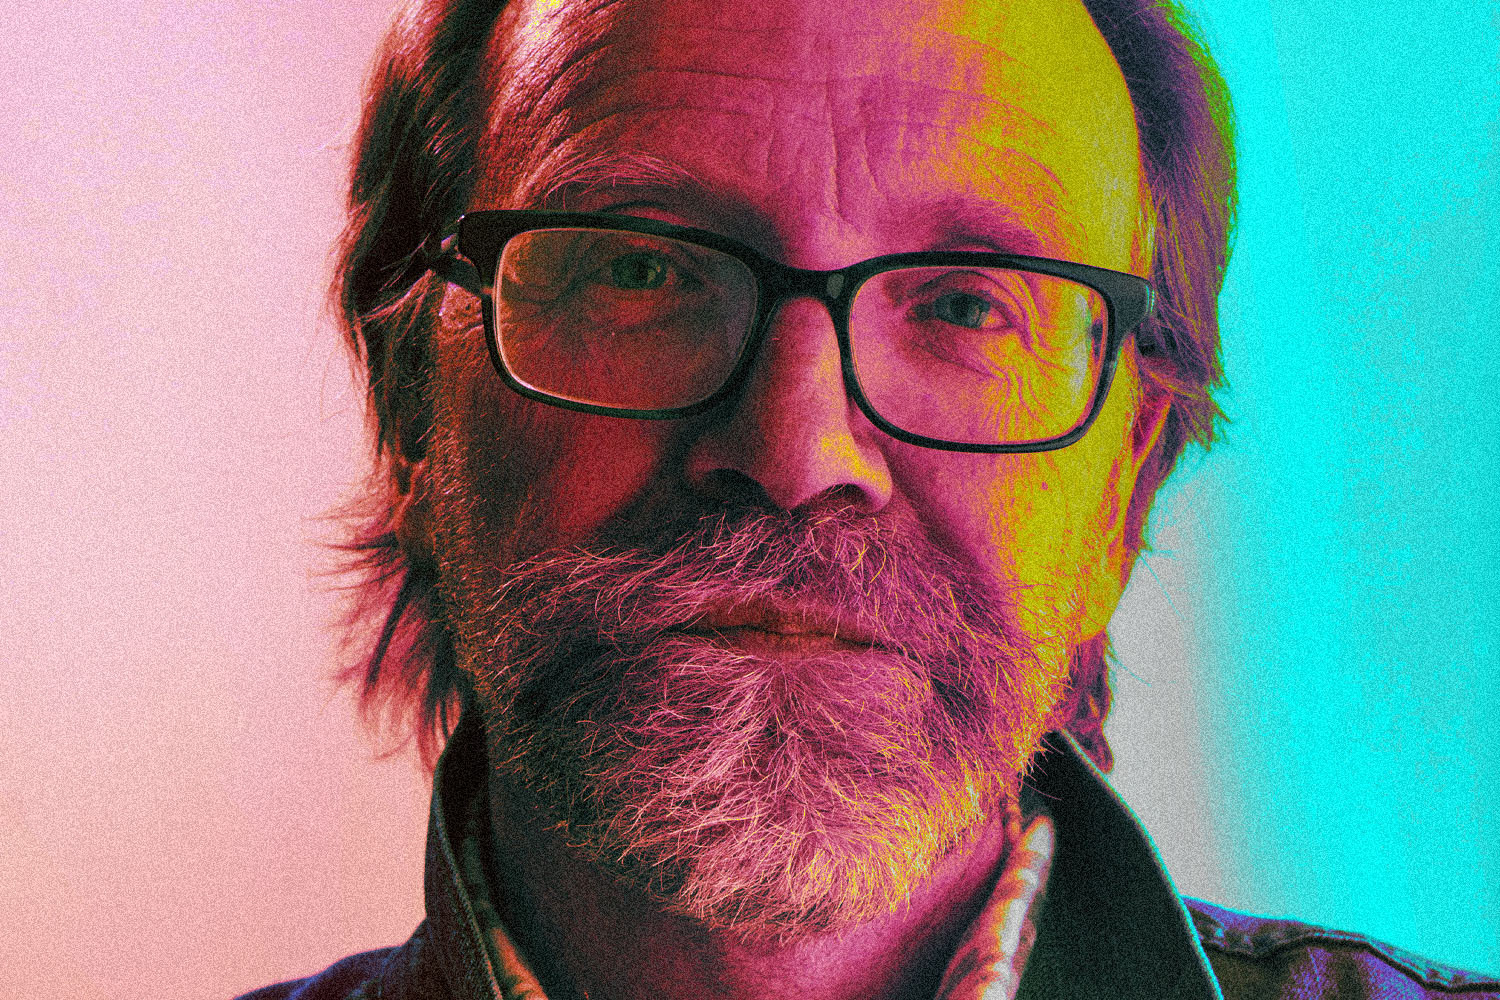 George Saunders on the Vitality of Fiction in Increasingly Turbulent Times